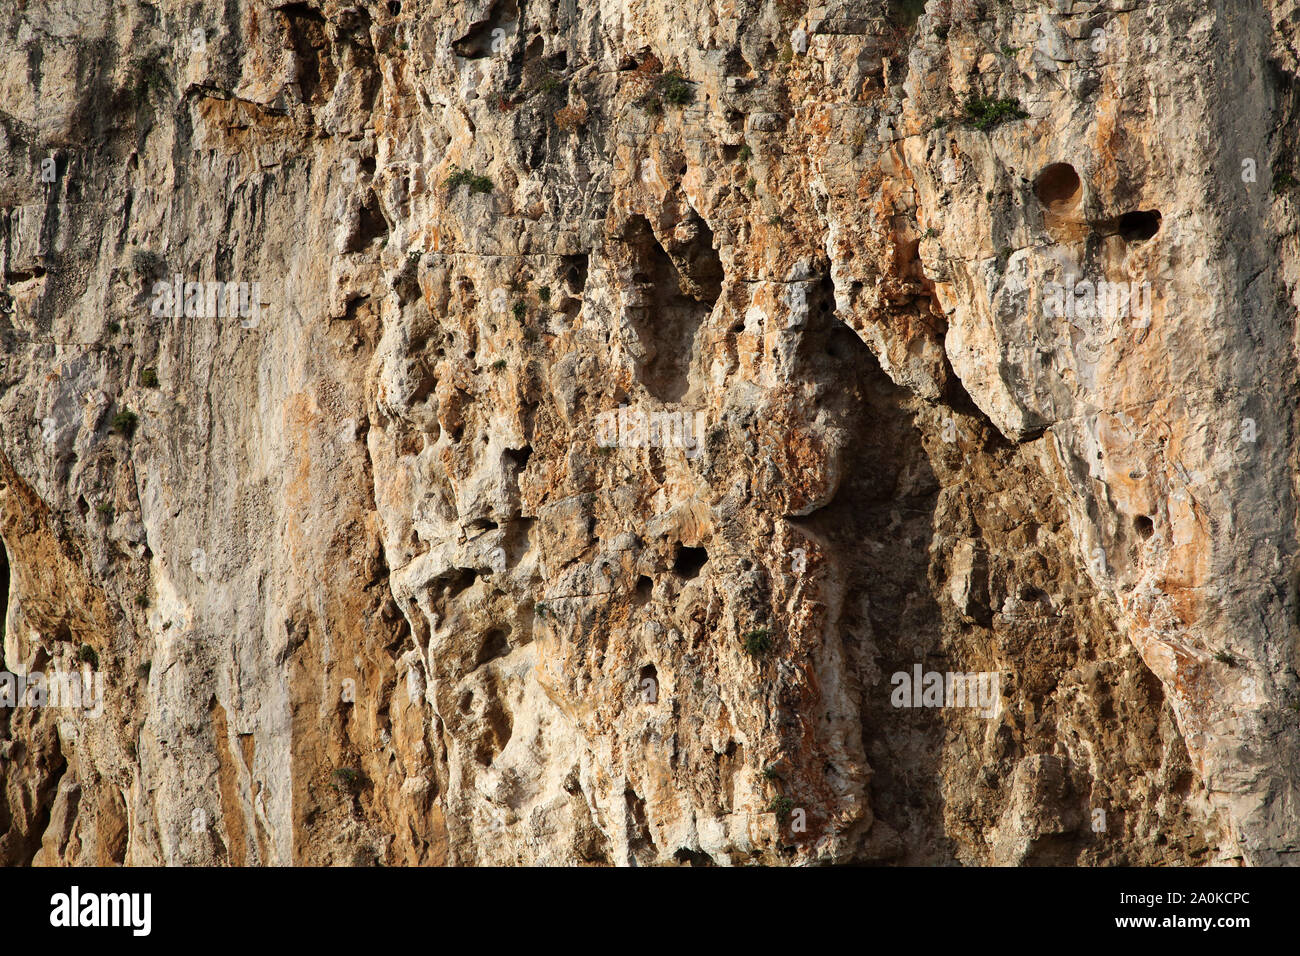 Vouliagmeni Attica Greece Lake Vouliagmeni Close up of the Swallow Holes in the Sandstone Rock Formation Stock Photo